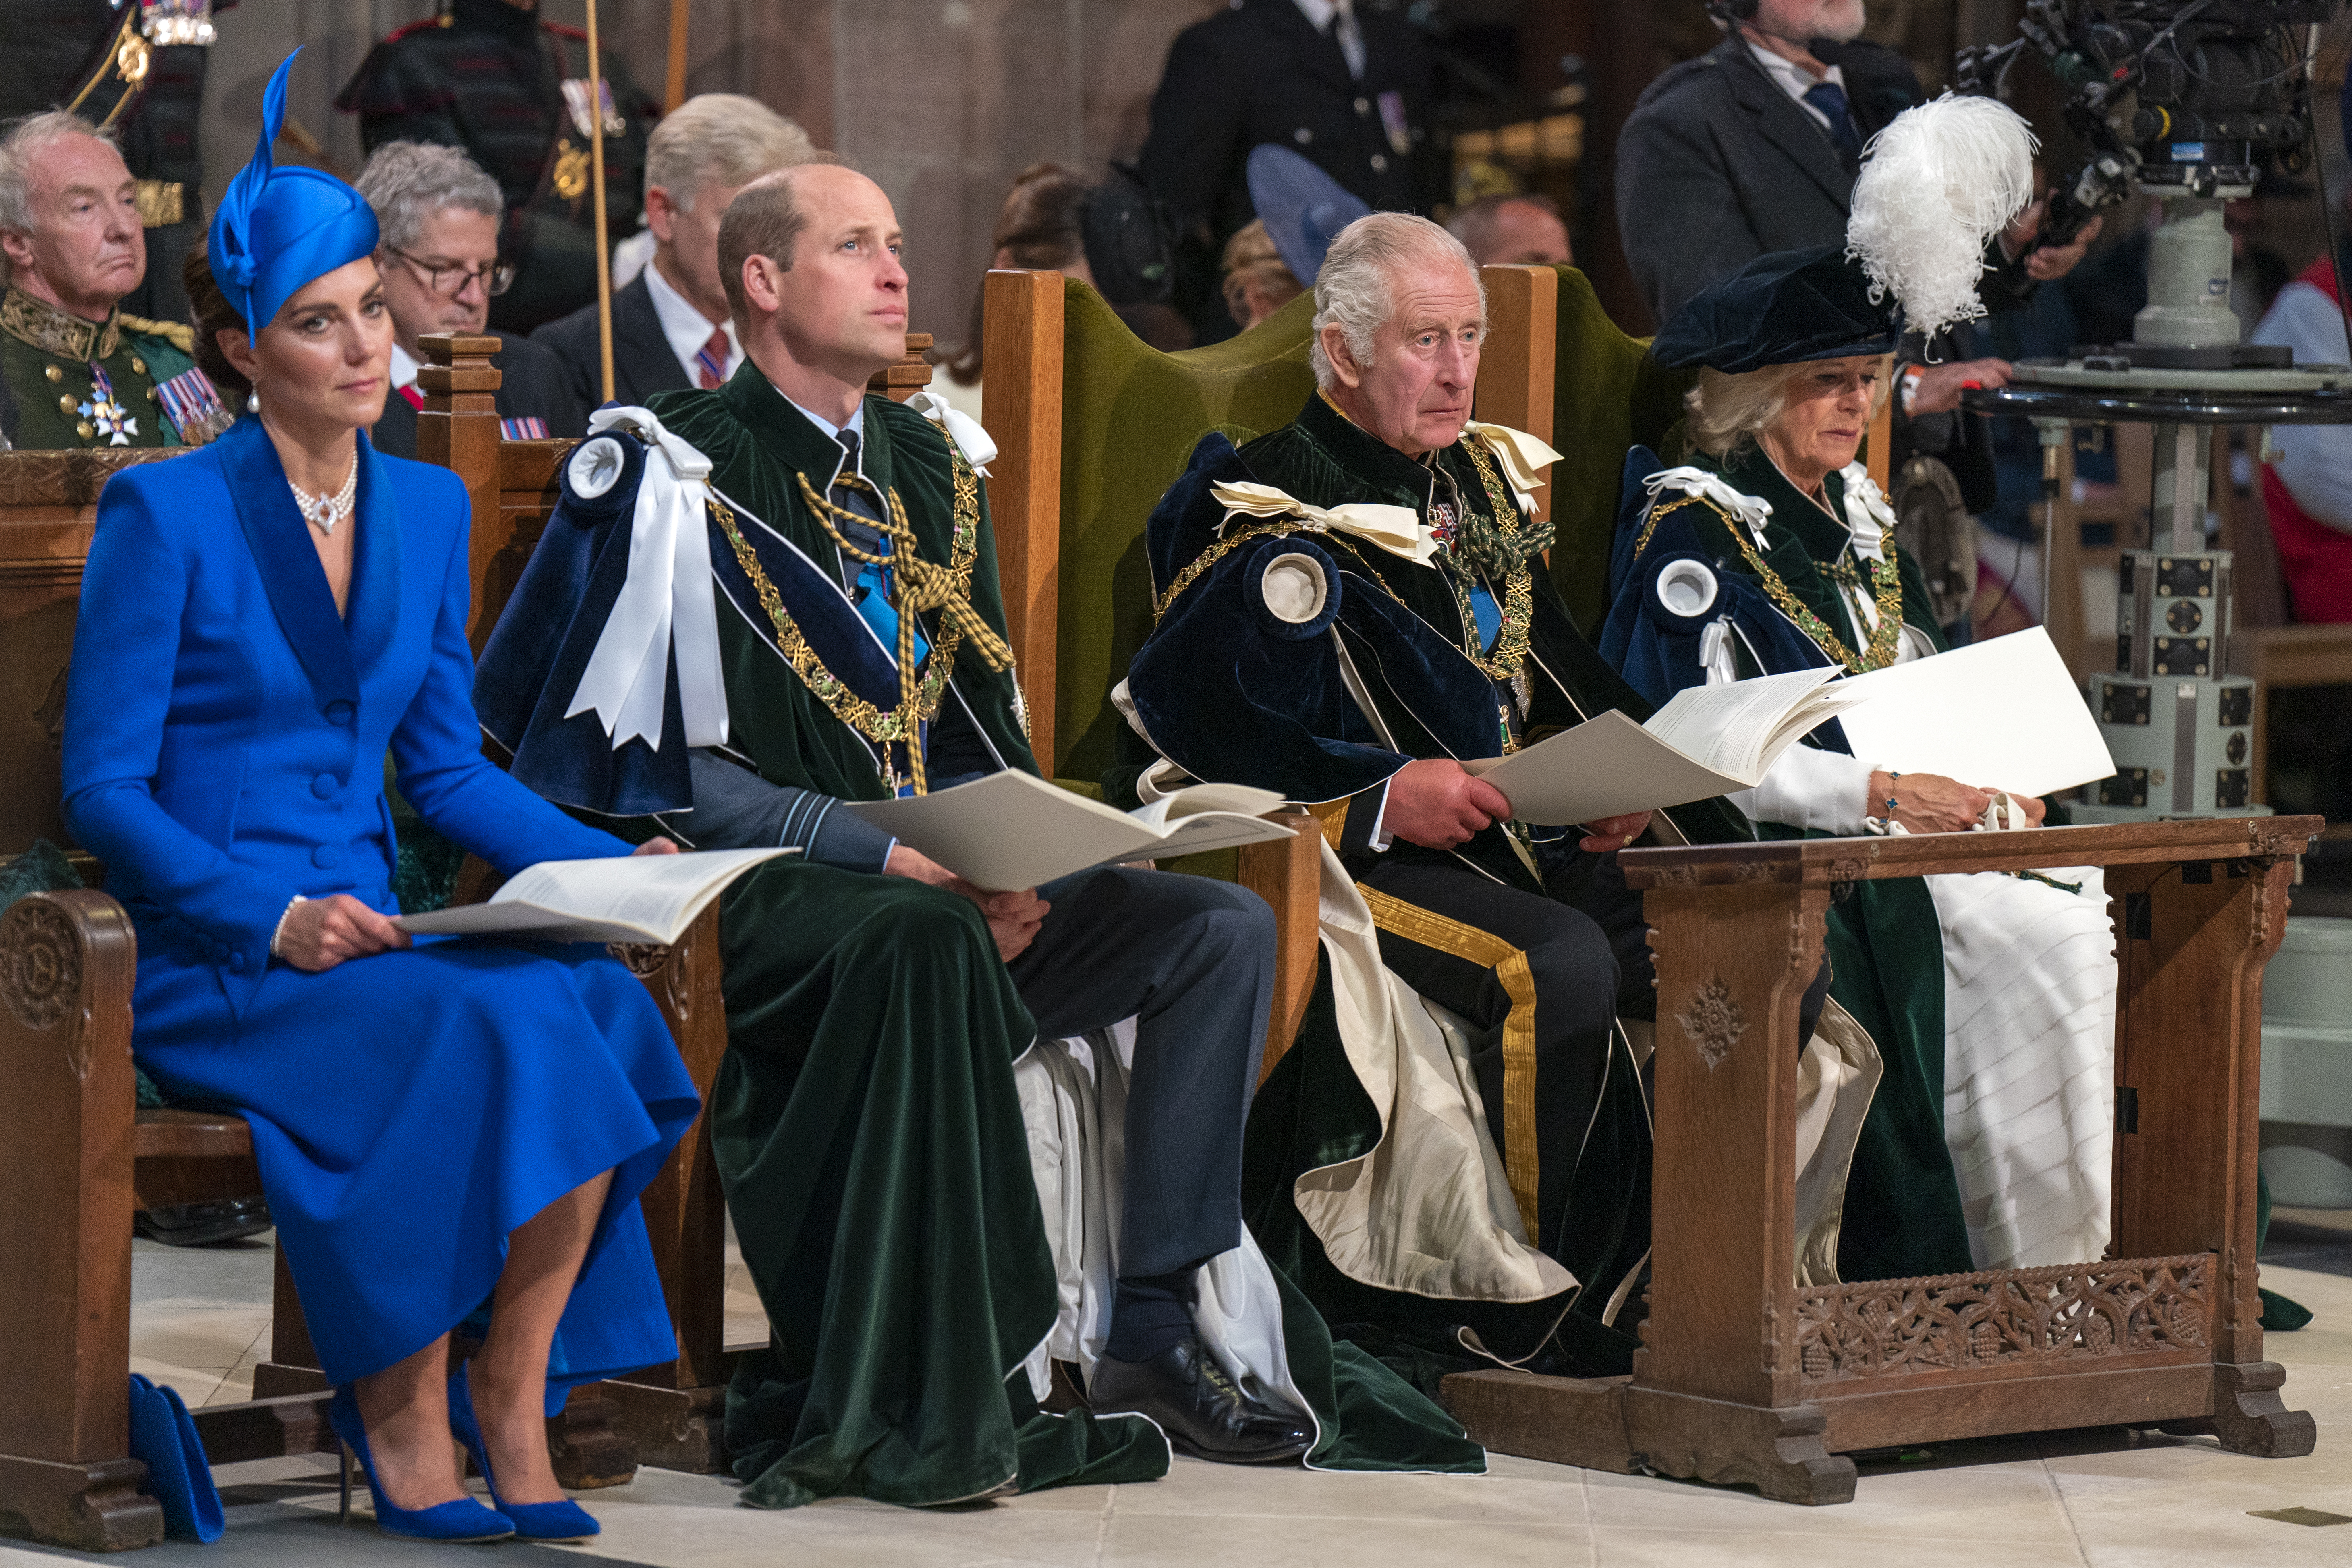 Princess Catherine, Prince William, King Charles III, and Queen Camilla at the National Service of Thanksgiving and Dedication for King Charles III and Queen Camilla, and the presentation of the Honours of Scotland on July 5, 2023 in Edinburgh, Scotland | Source: Getty Images